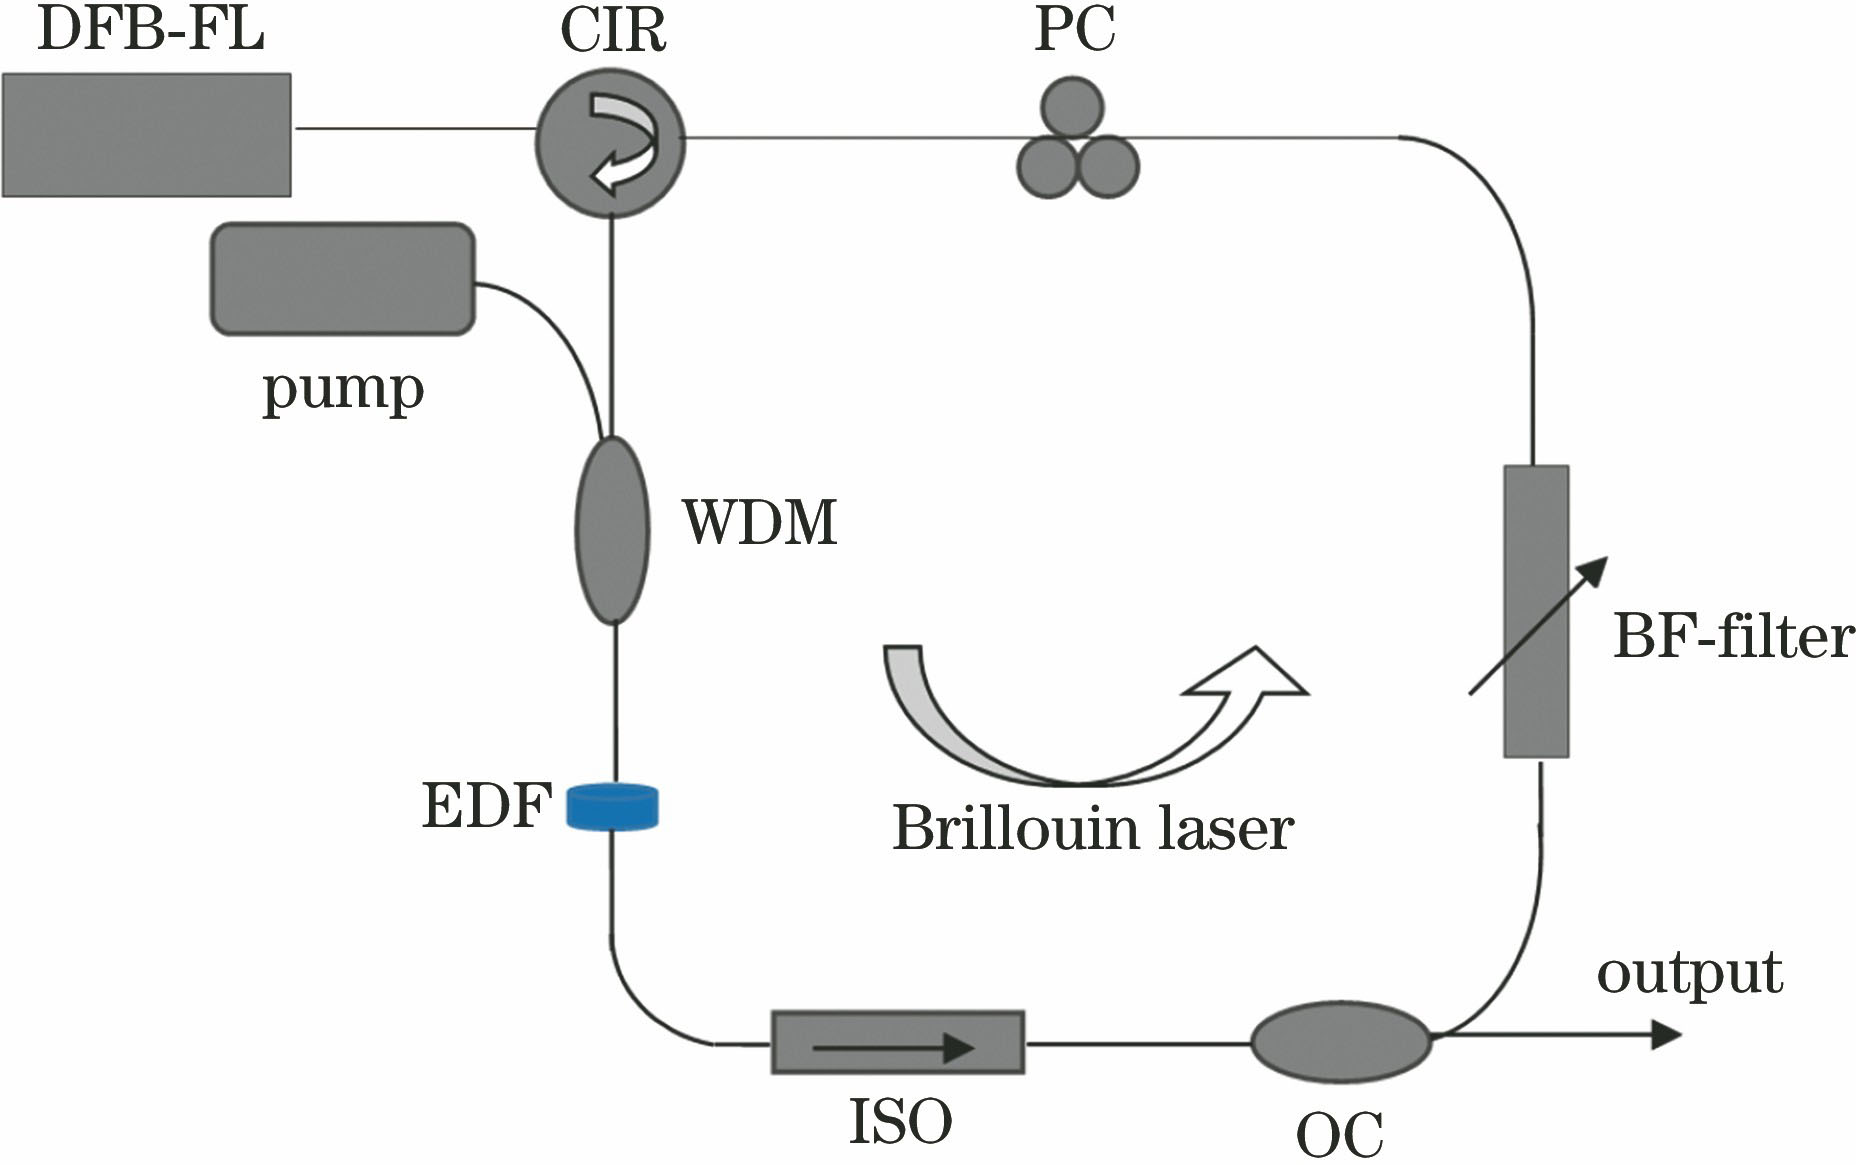 Schematic diagram of the Brillouin ring cavity laser